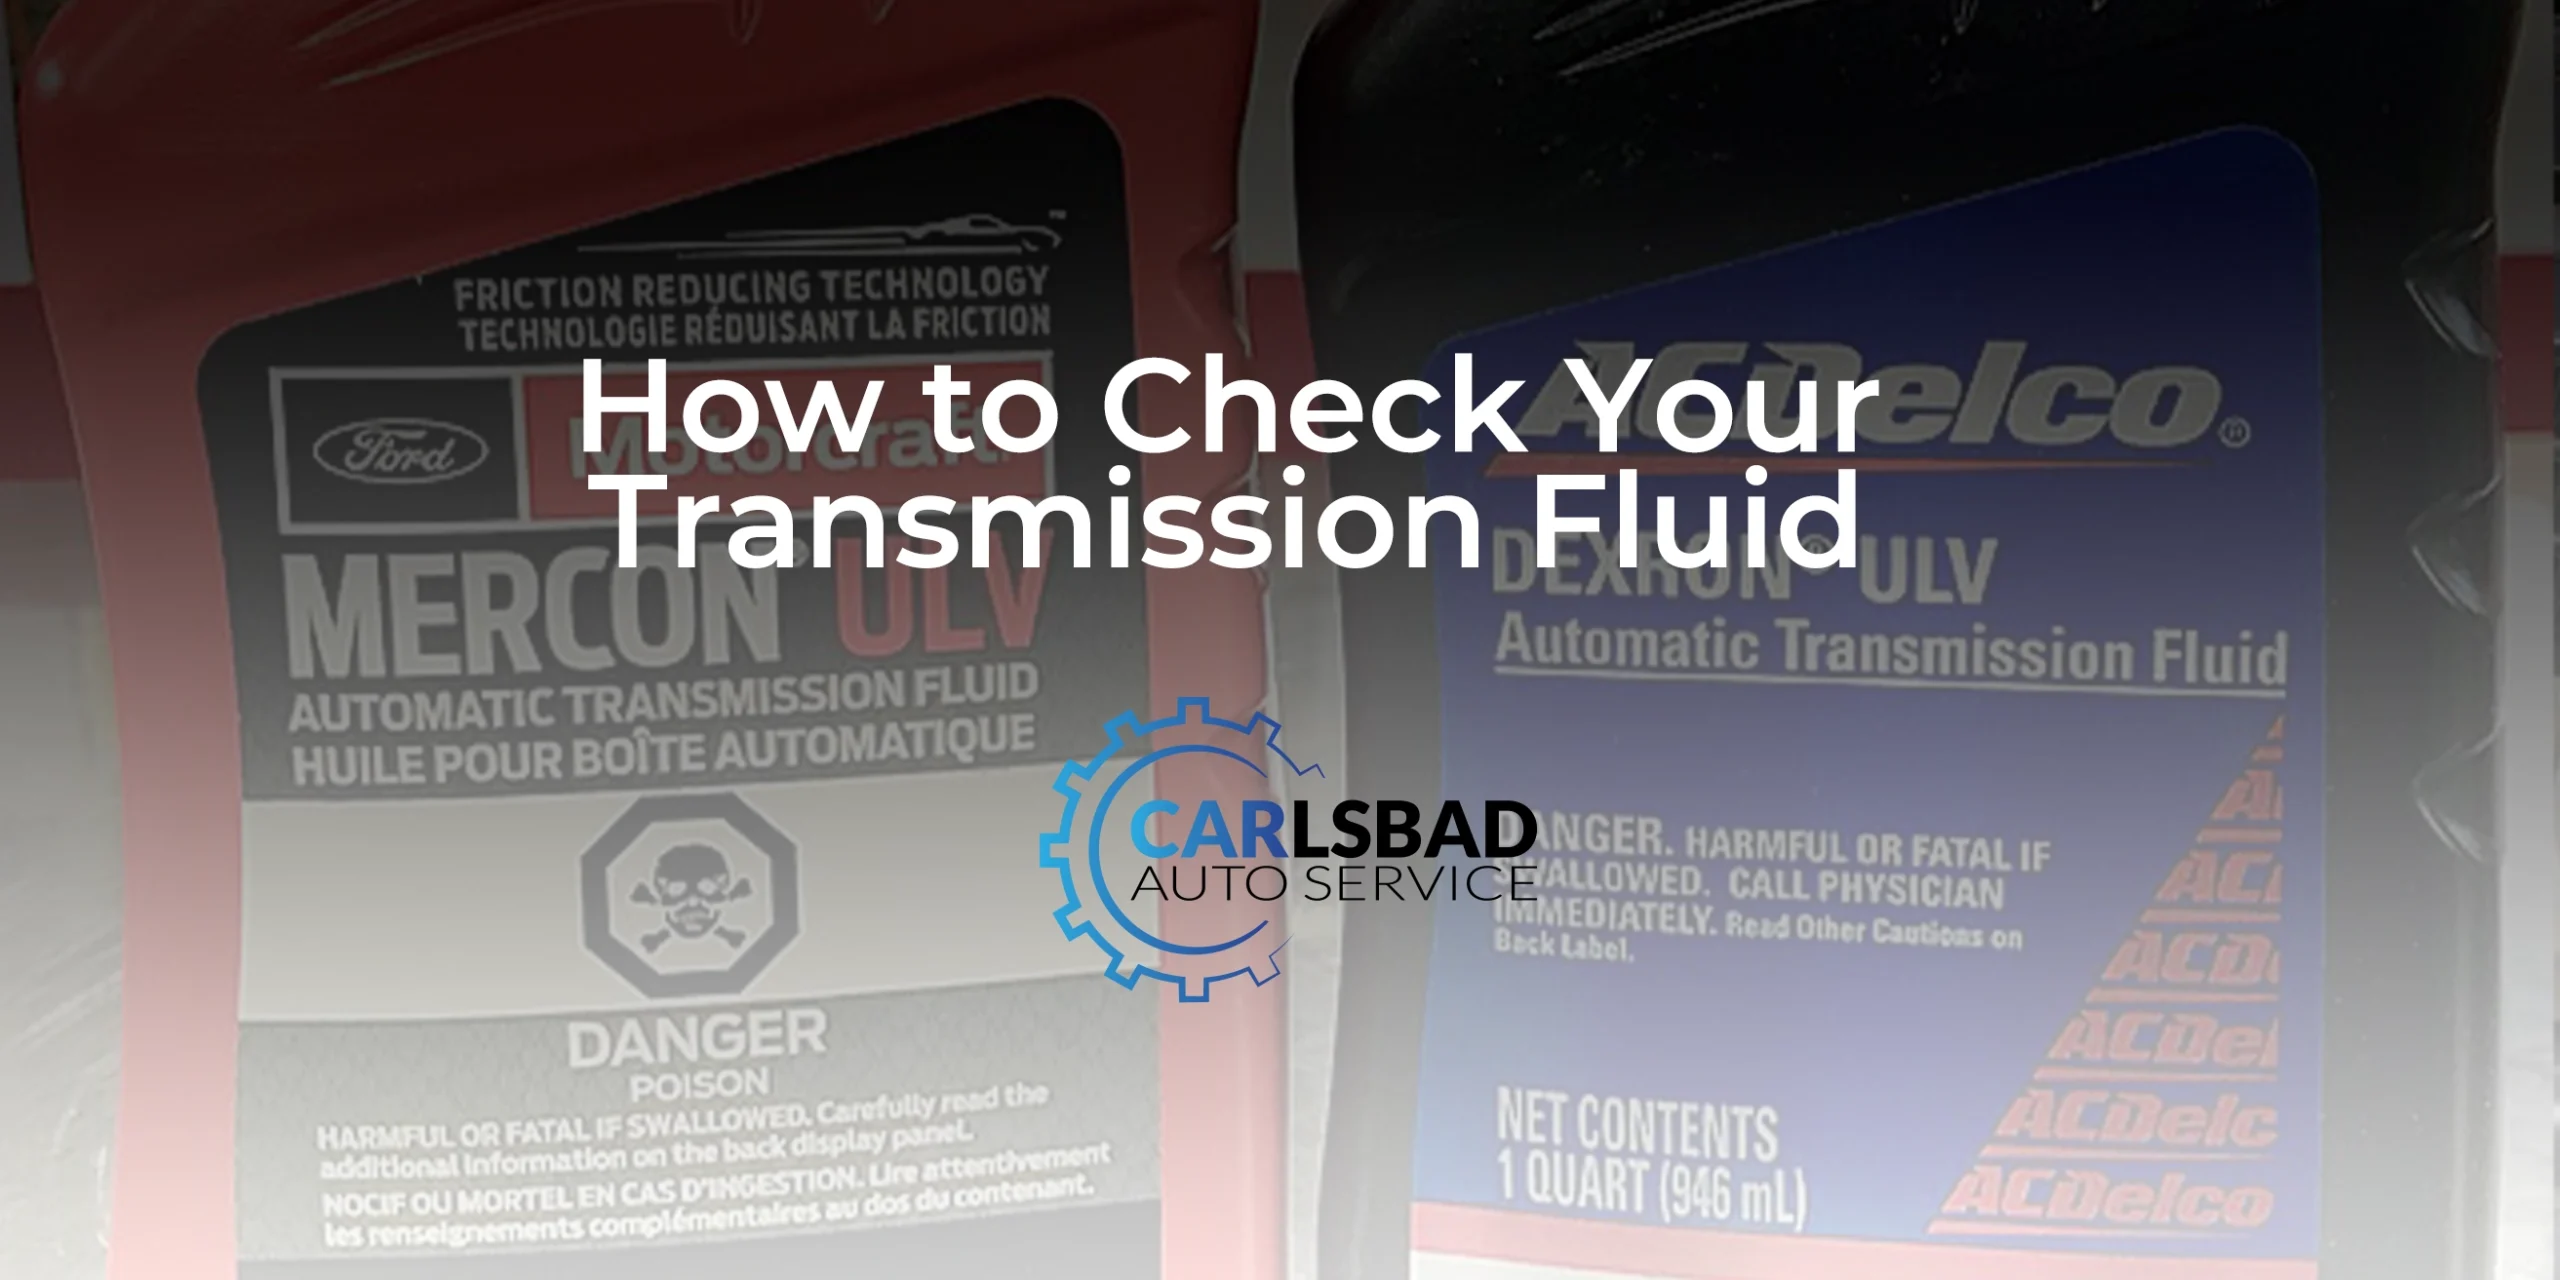 How to Check Your Transmission Fluid